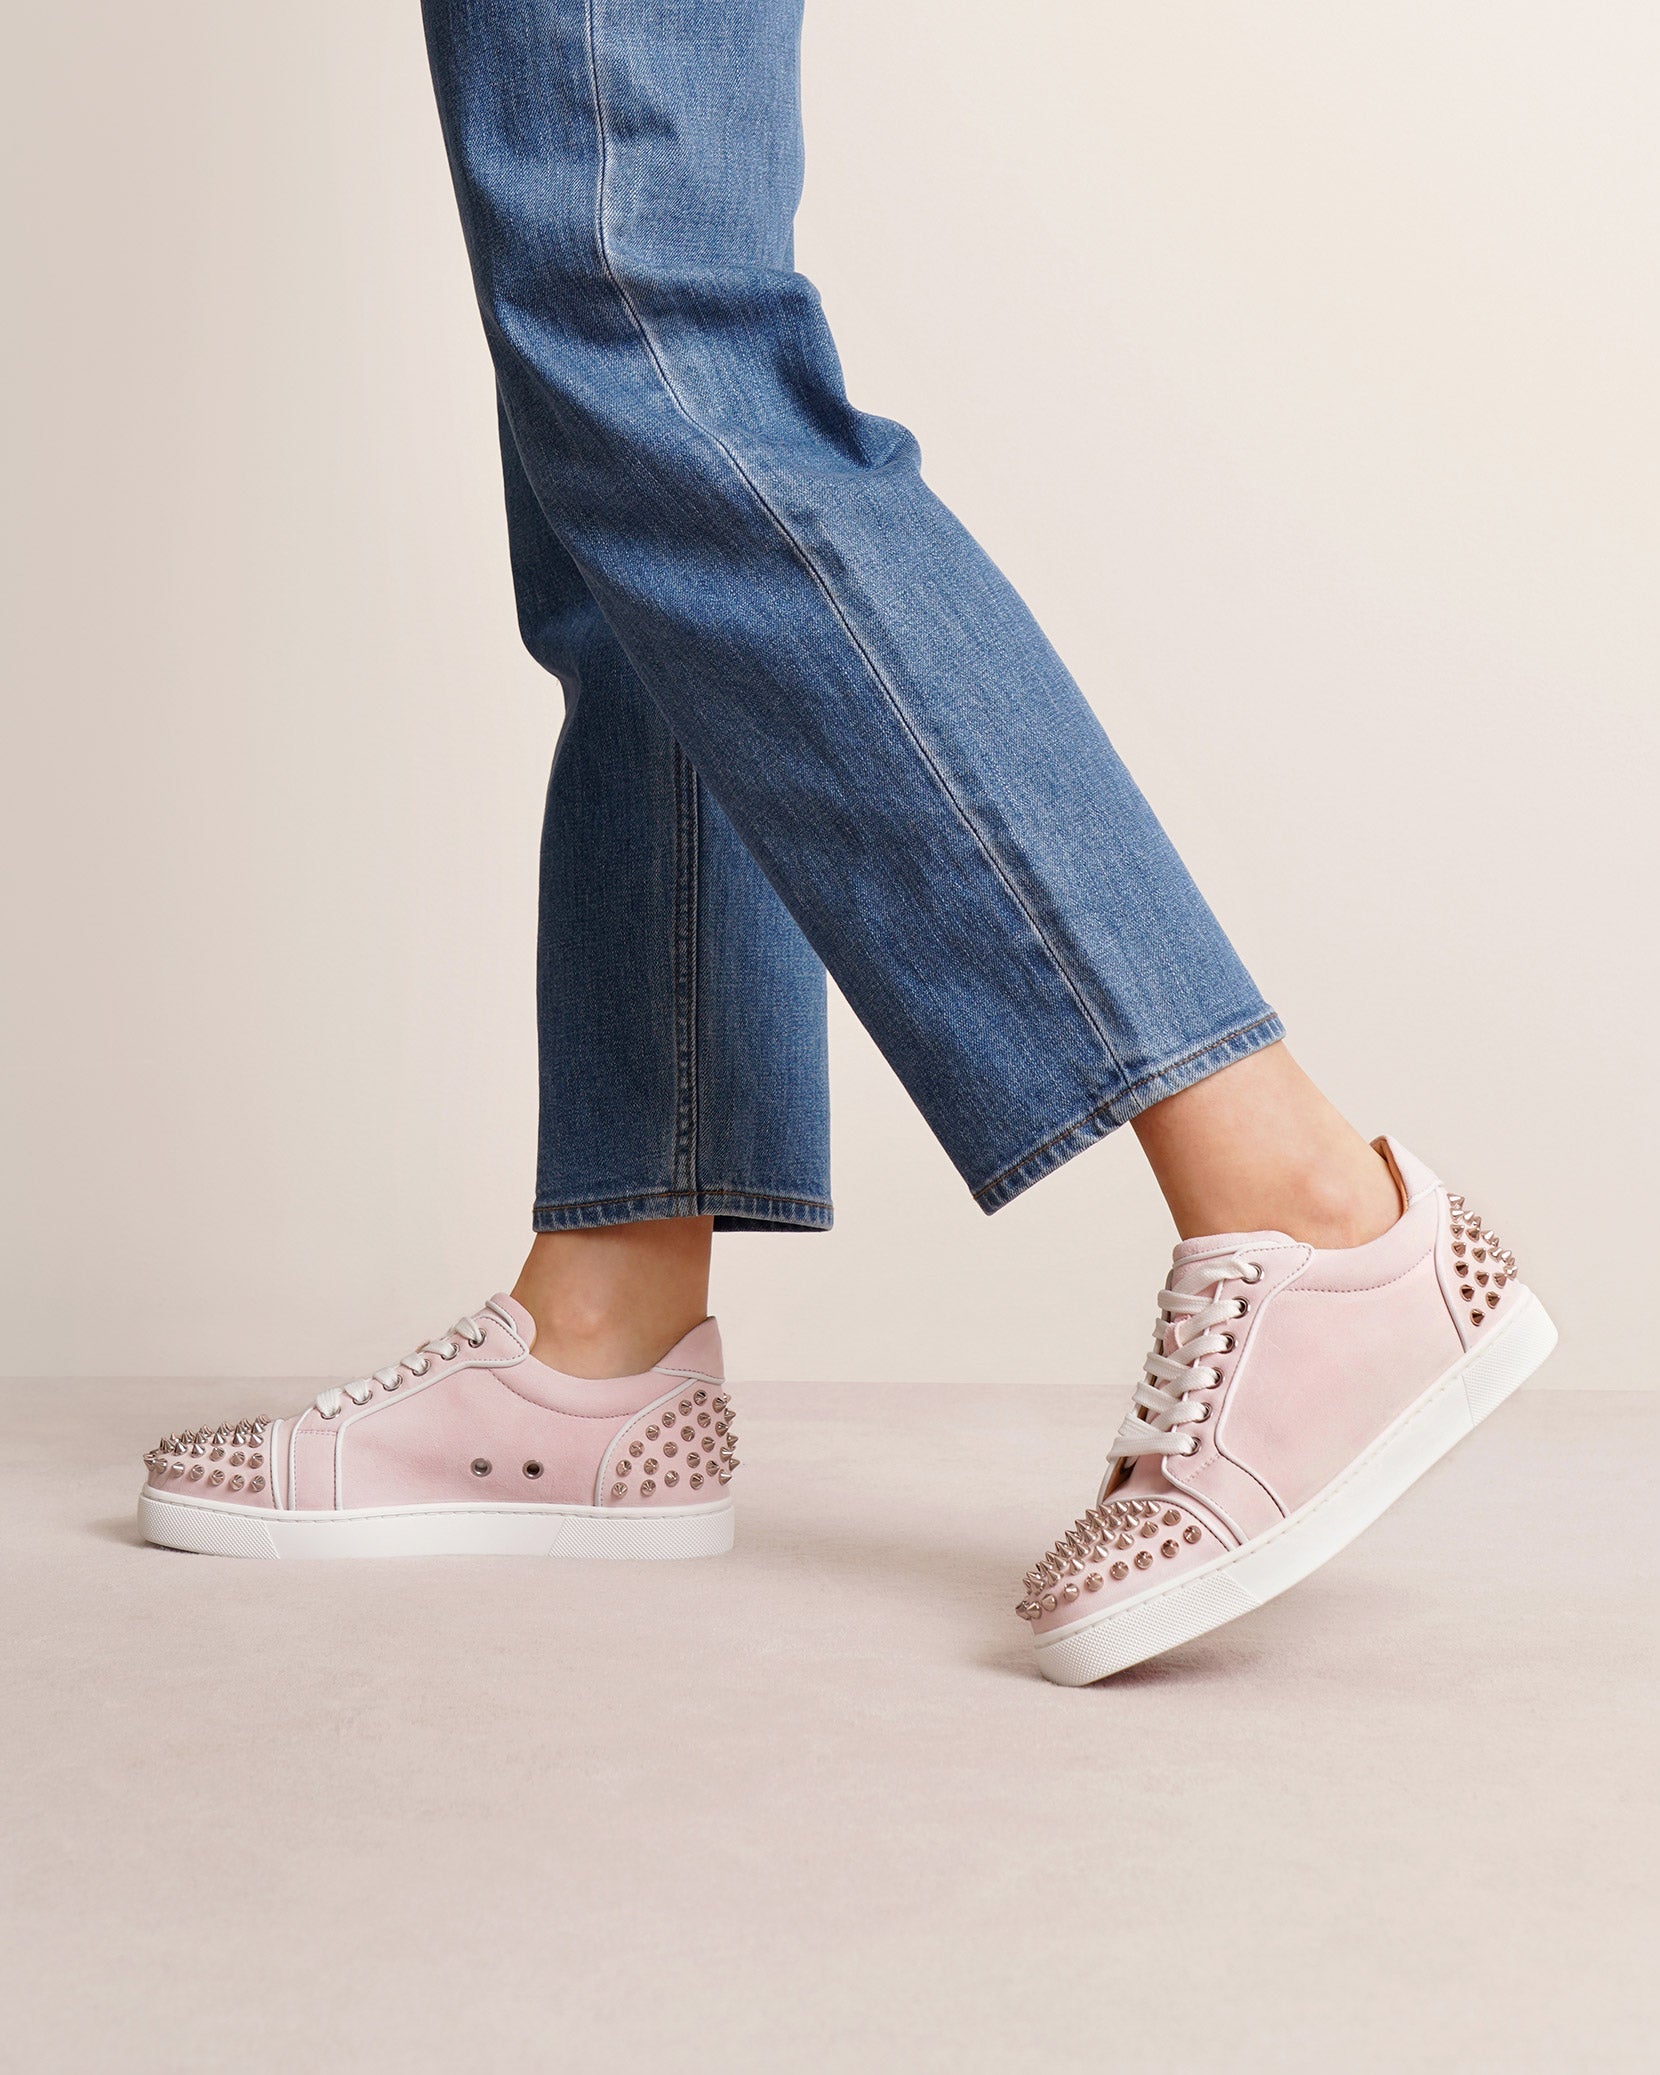 Vieria 2 spikes poupee pink sneakers